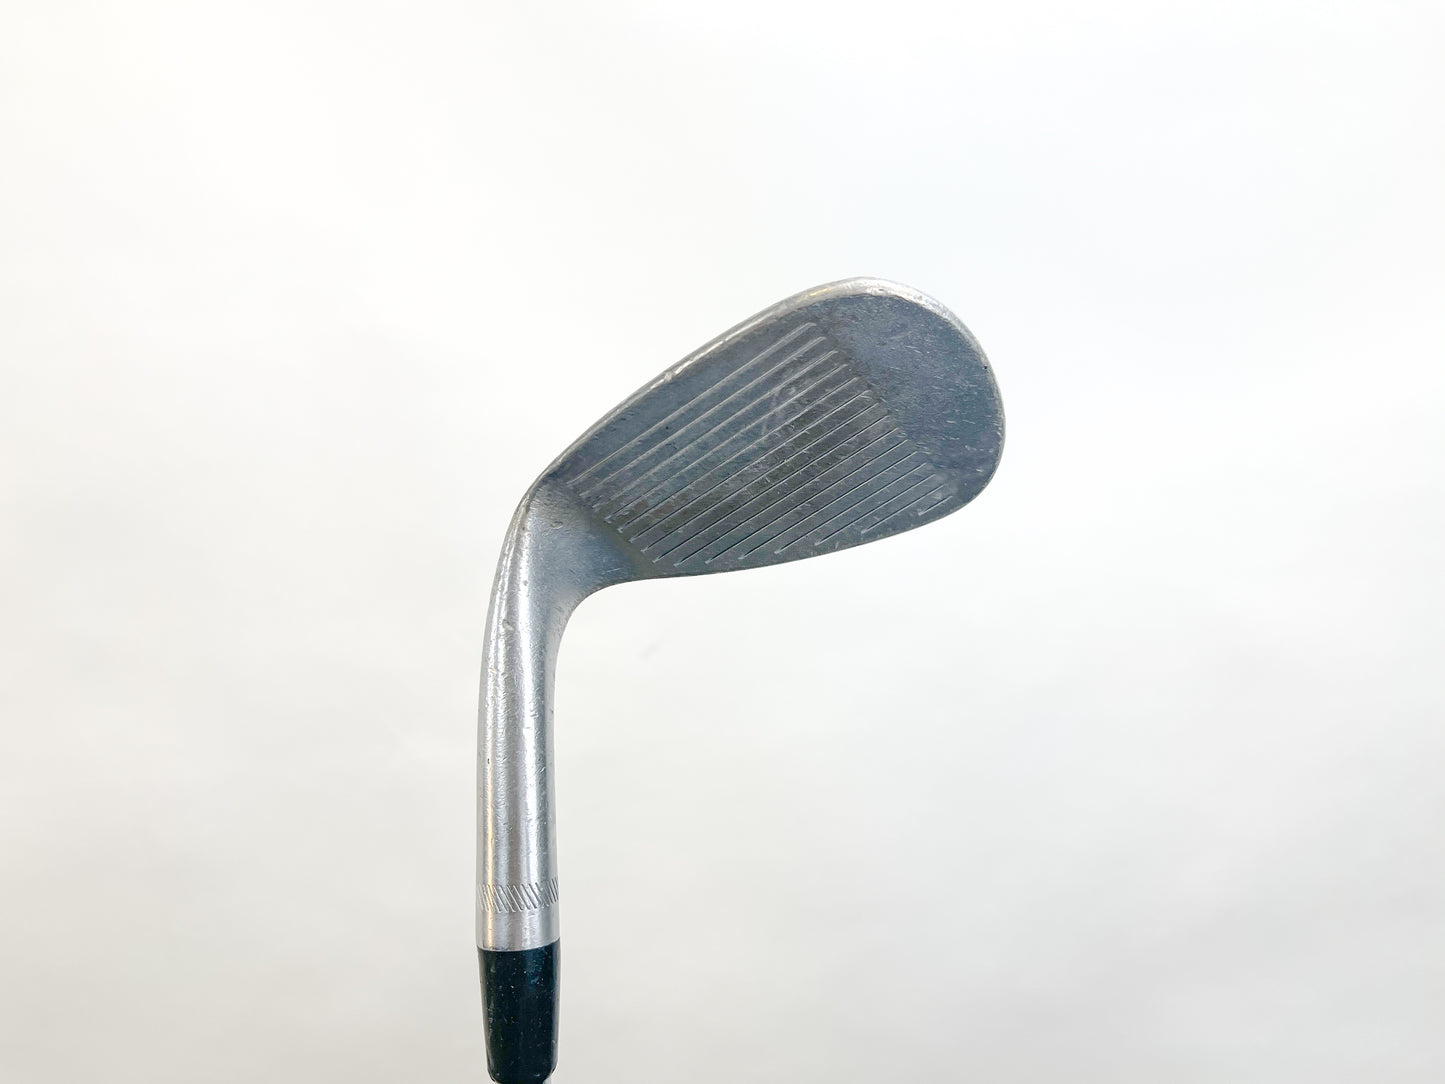 Used Titleist Vokey Spin Milled Tour Chrome '09 Sand Wedge - Right-Handed - 56 Degrees - Stiff Flex-Next Round